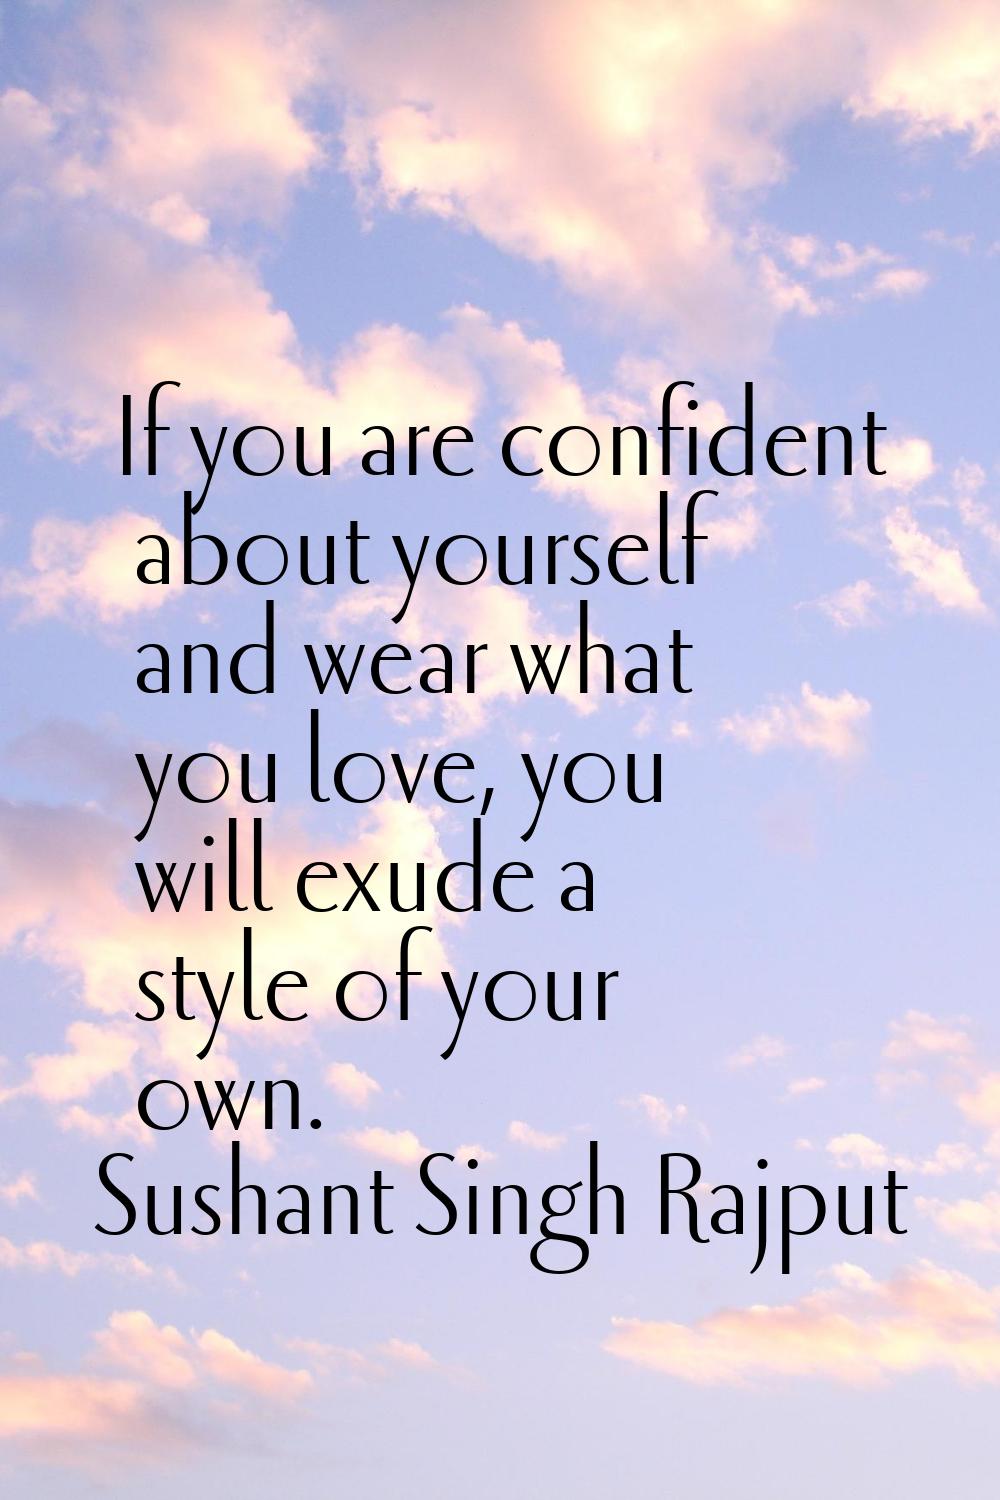 If you are confident about yourself and wear what you love, you will exude a style of your own.